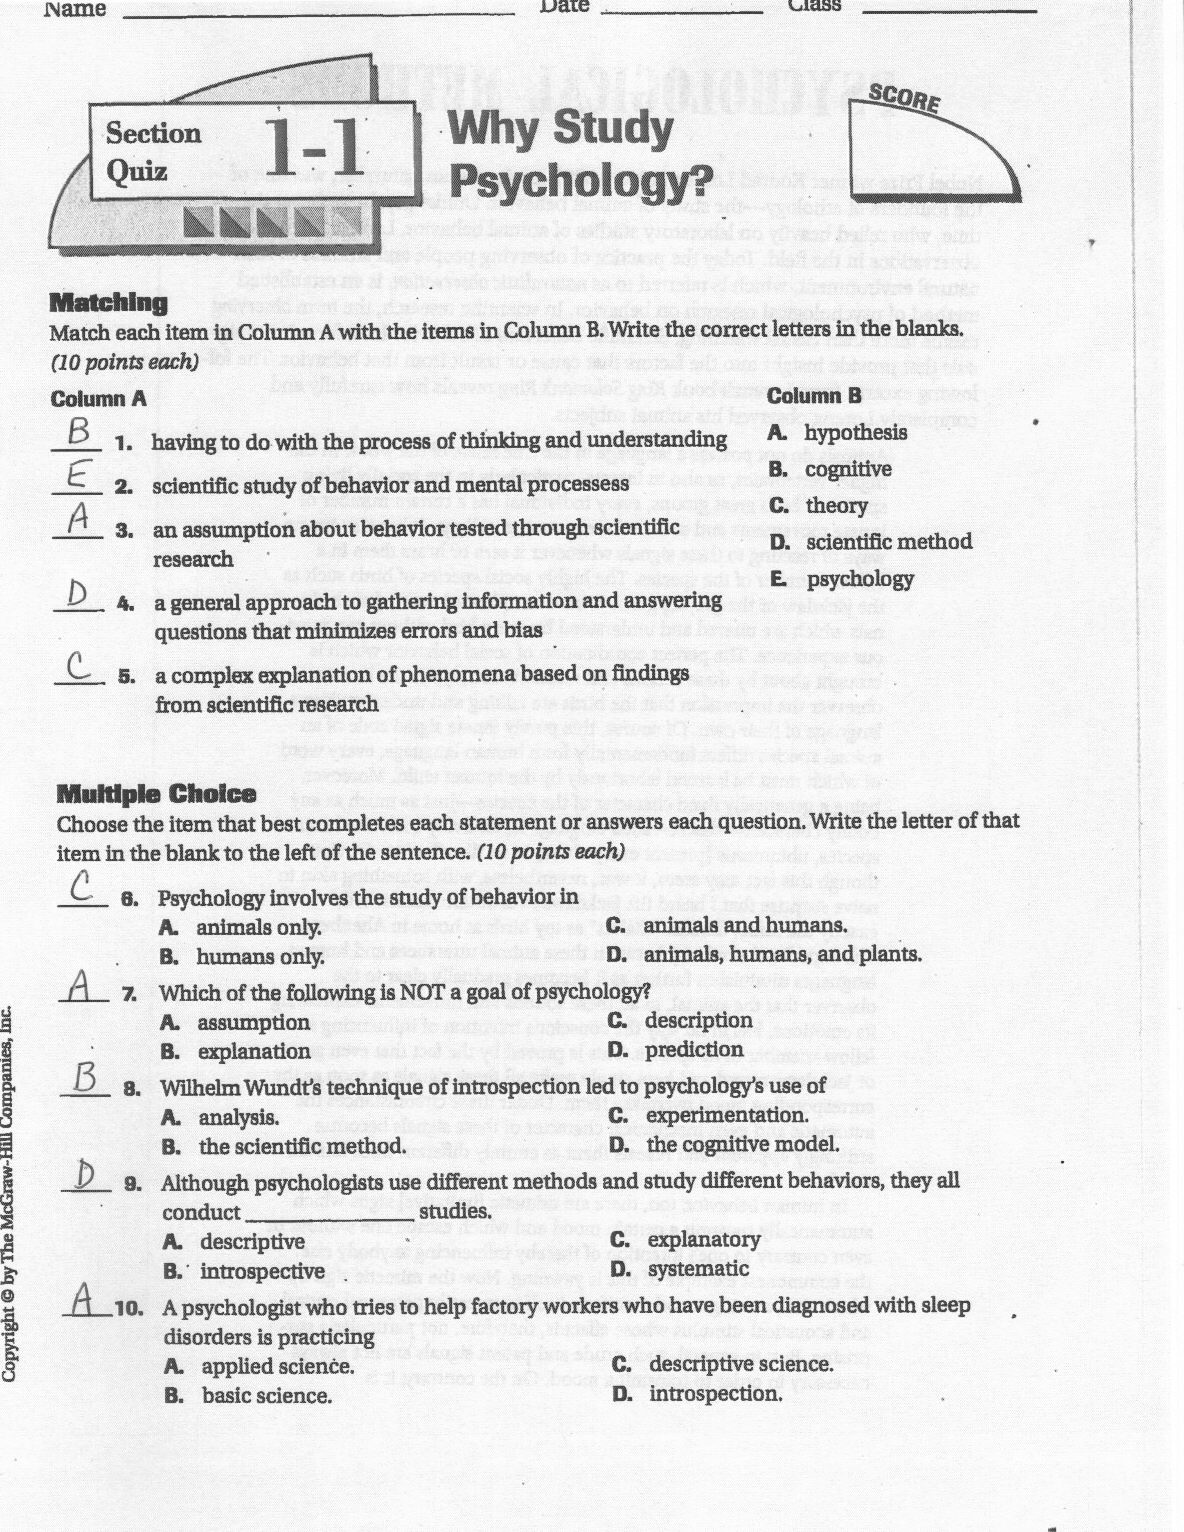 history of psychology assignment